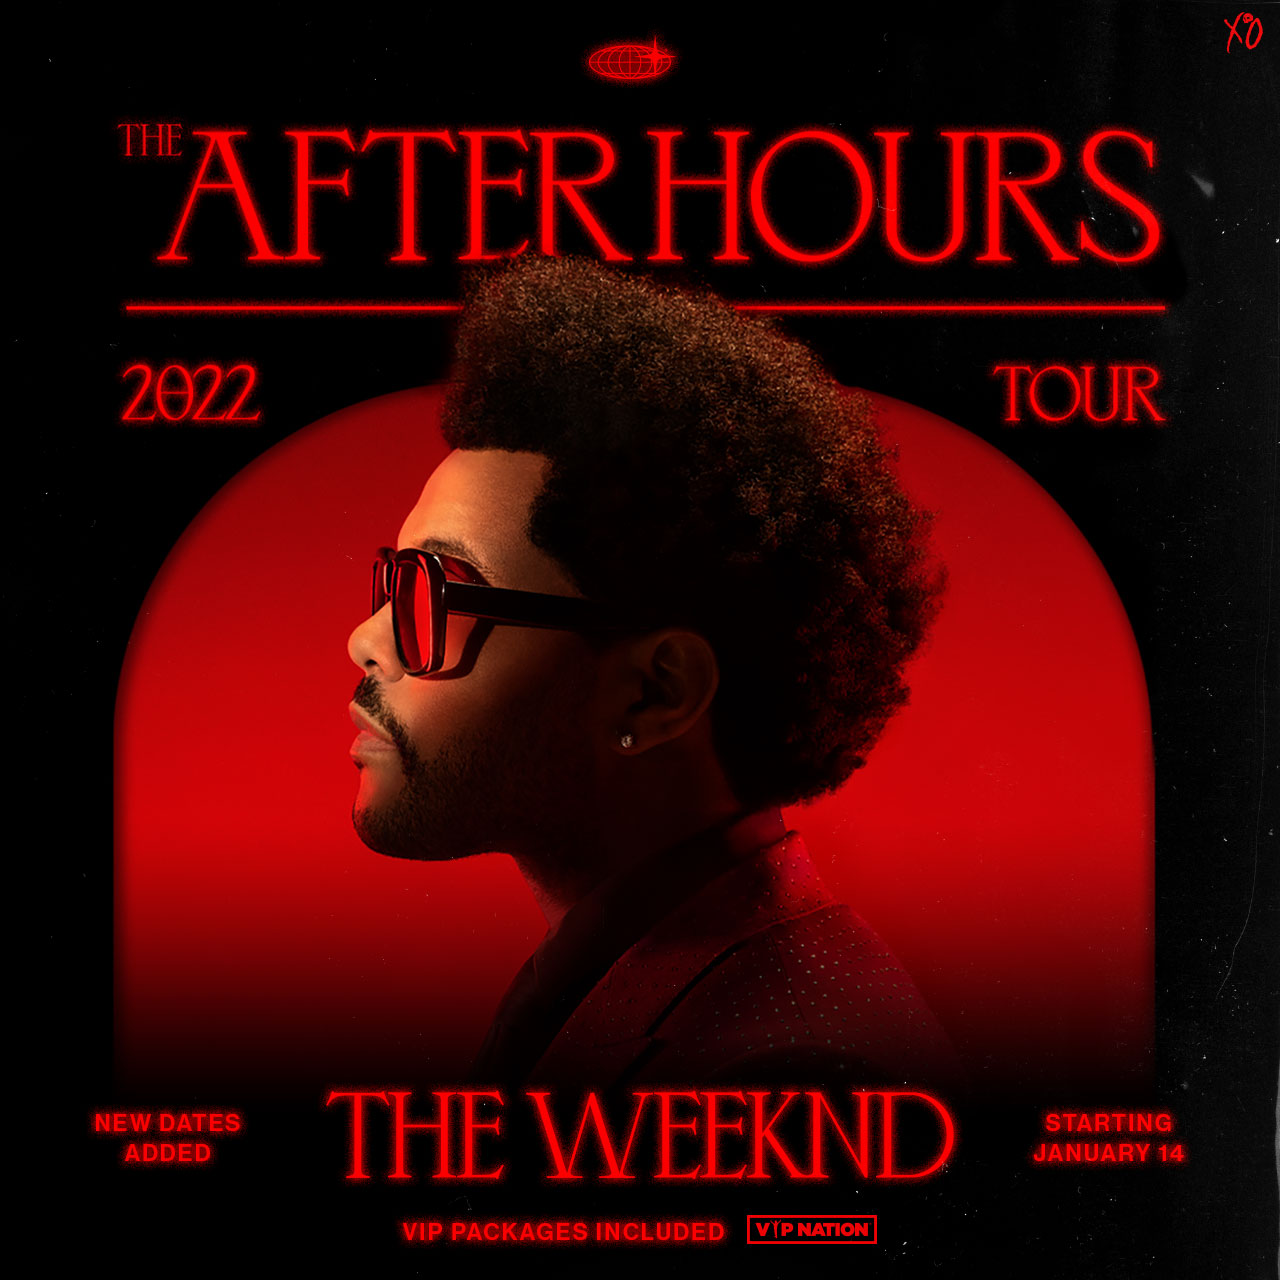 The After Hours Tour